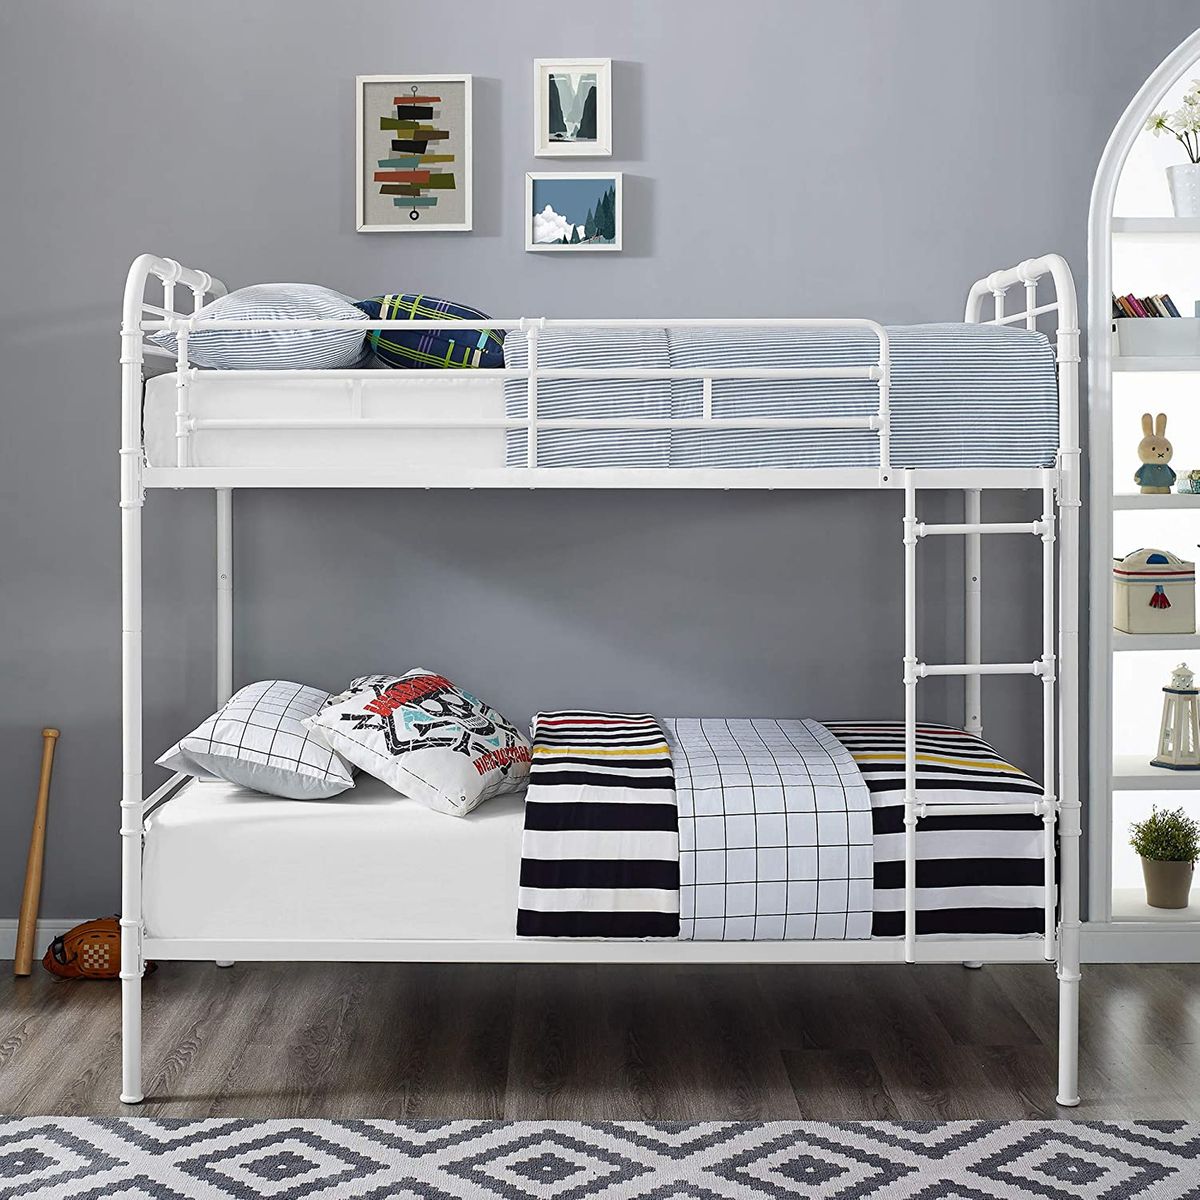 8 Best Bunk Beds 2020 The Strategist, Bunk Beds With Full On Bottom